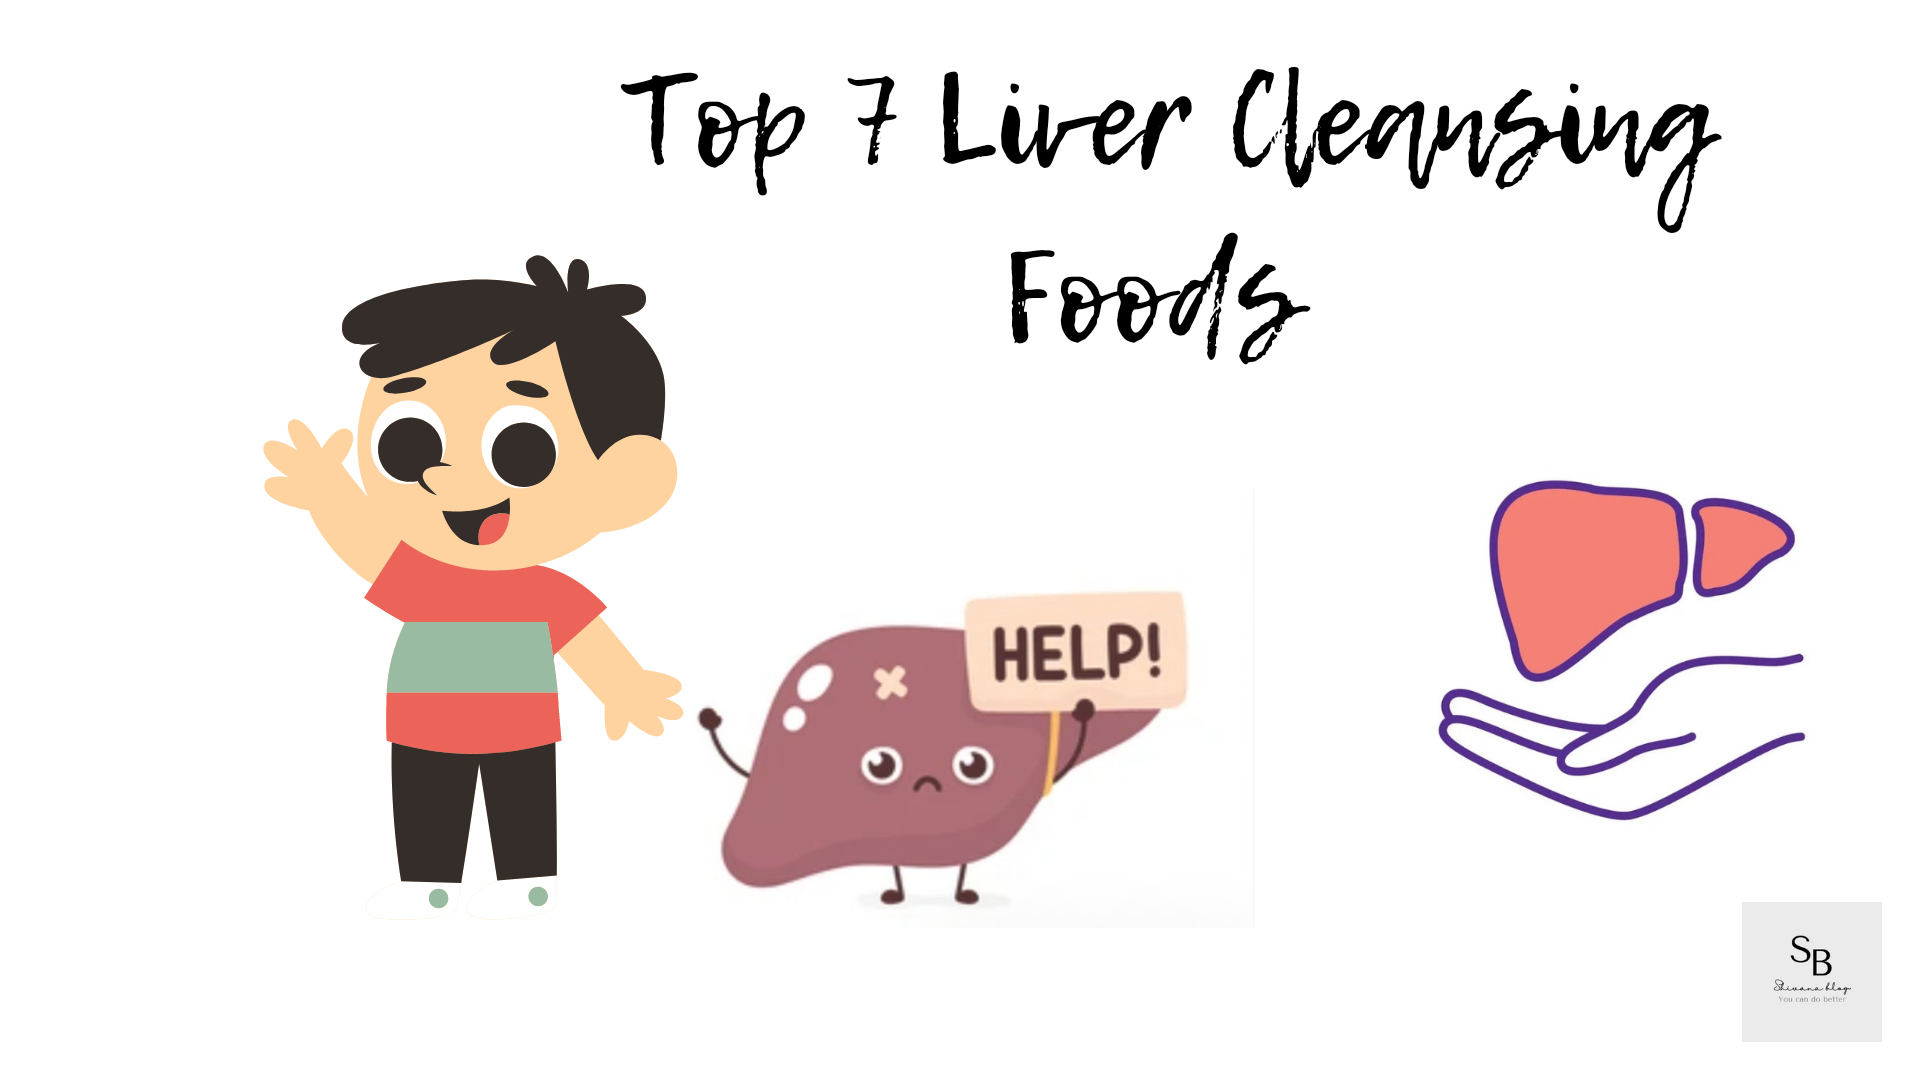 Top 7 Liver Cleansing Foods pic